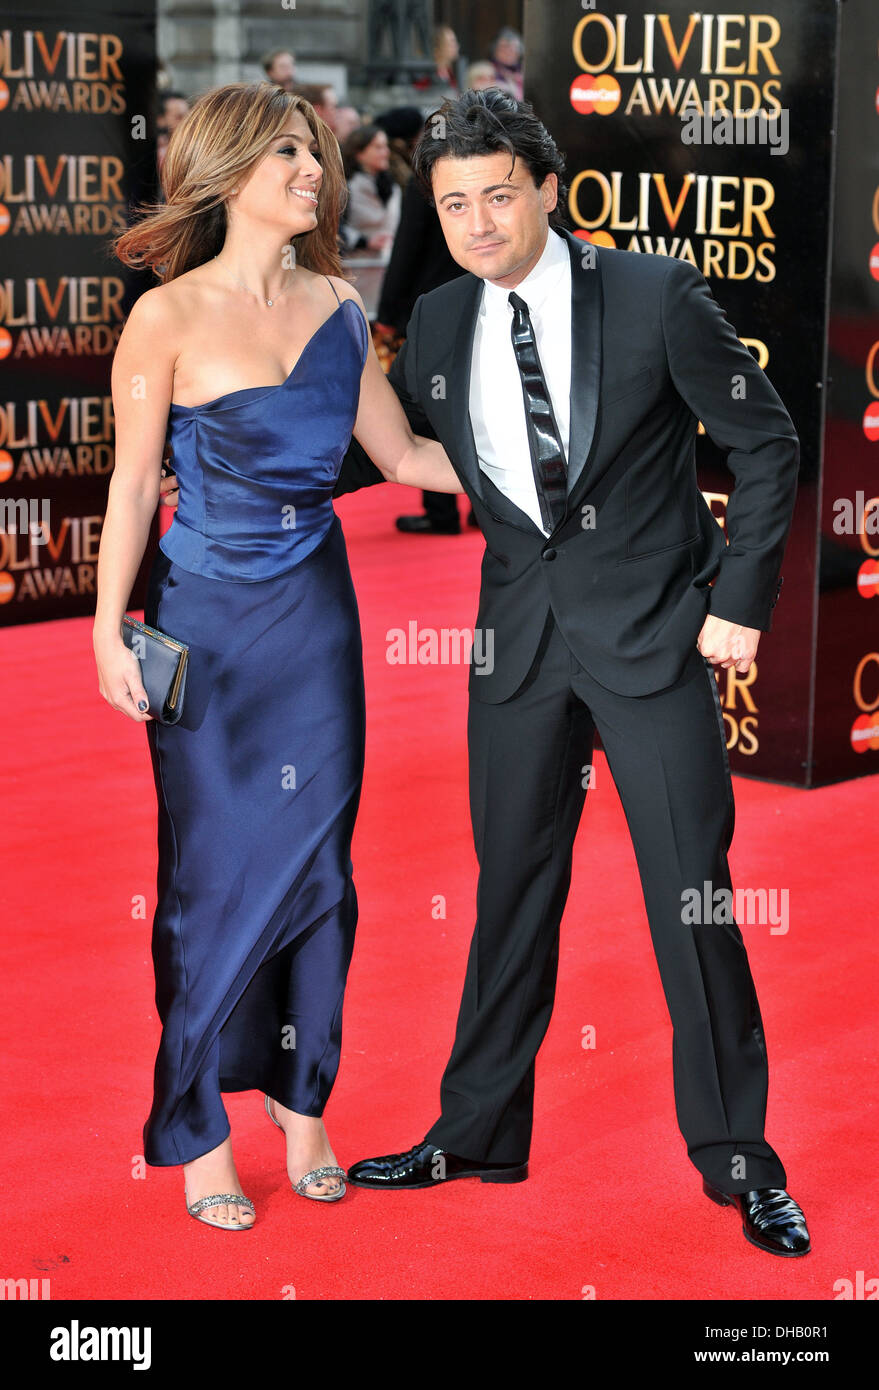 Vittorio Grigolo and guest Olivier Awards 2012 held at Royal Opera House - Arrivals London England - 15.04.12 Stock Photo